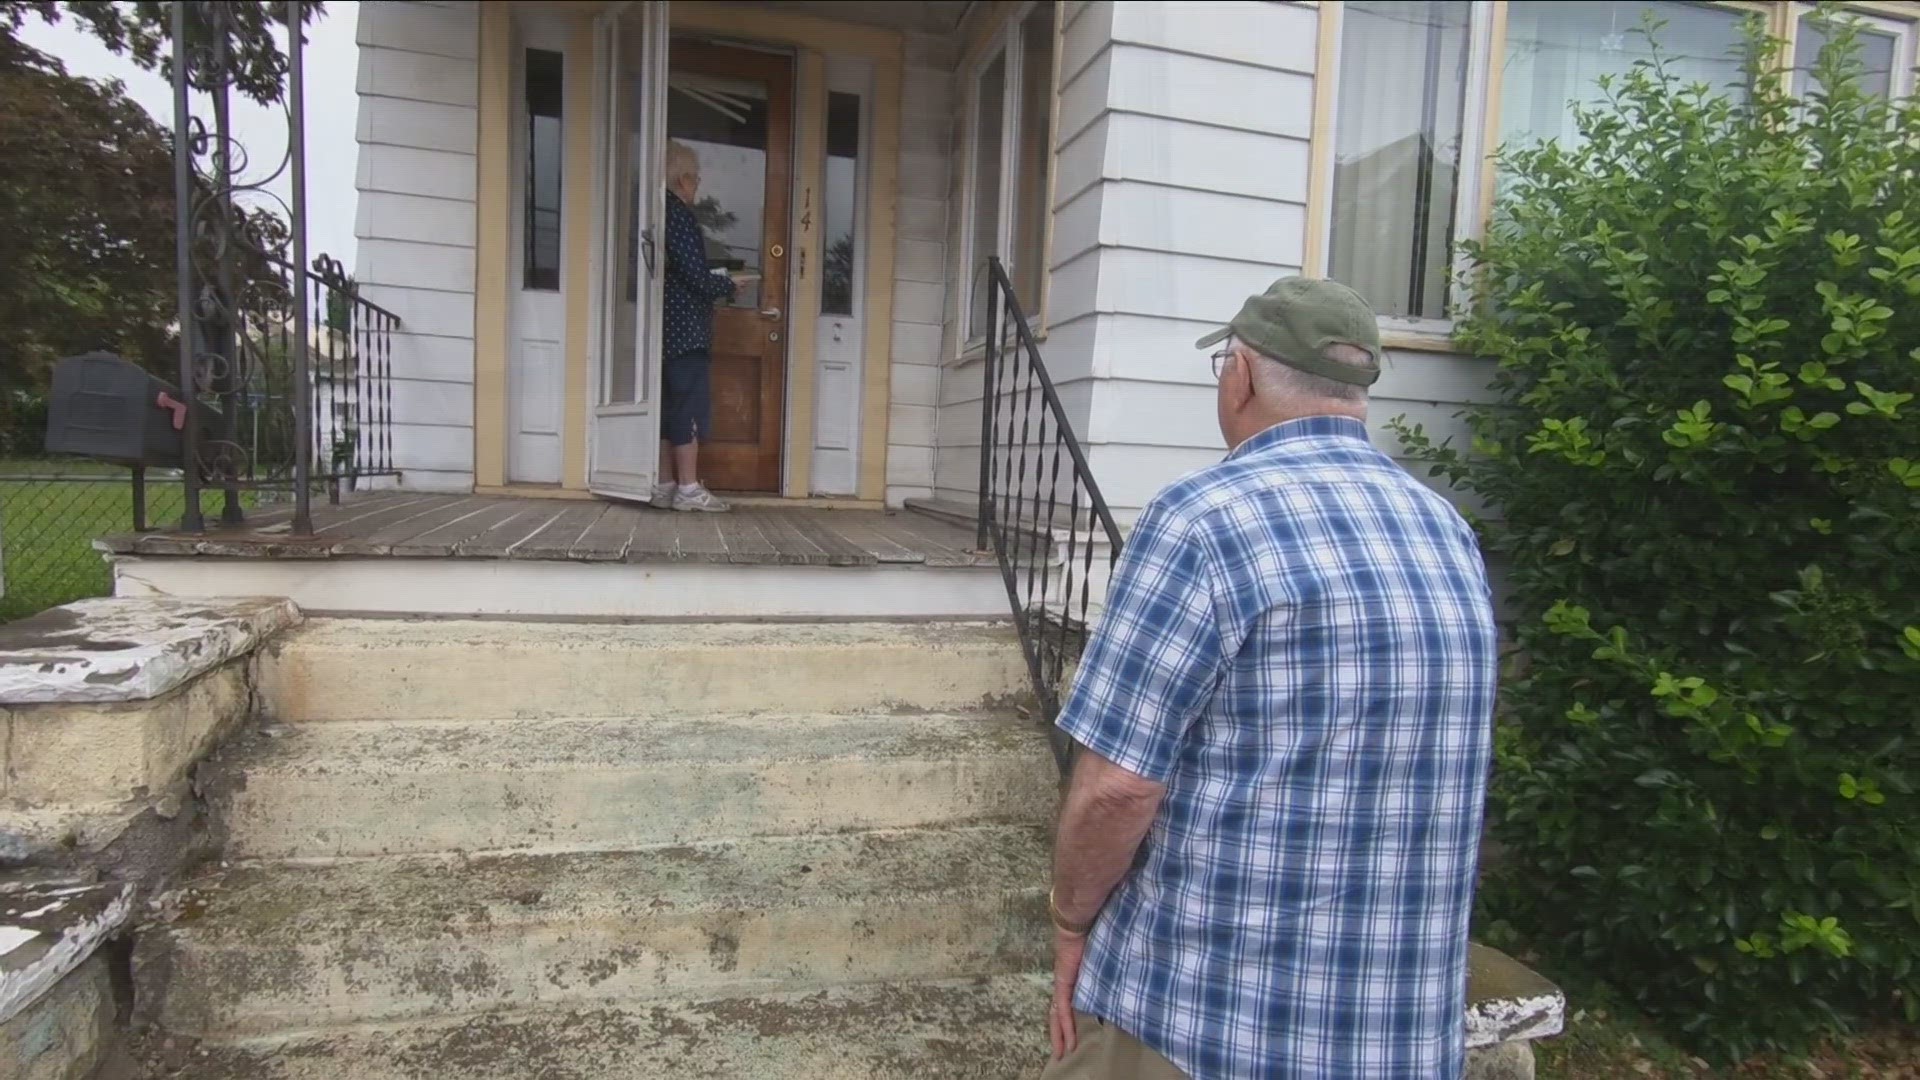 83-year-old Dick and 82-year-old Elaine DeLisle of West Seneca spend hours delivering about 20 meals for Feed More everyday.